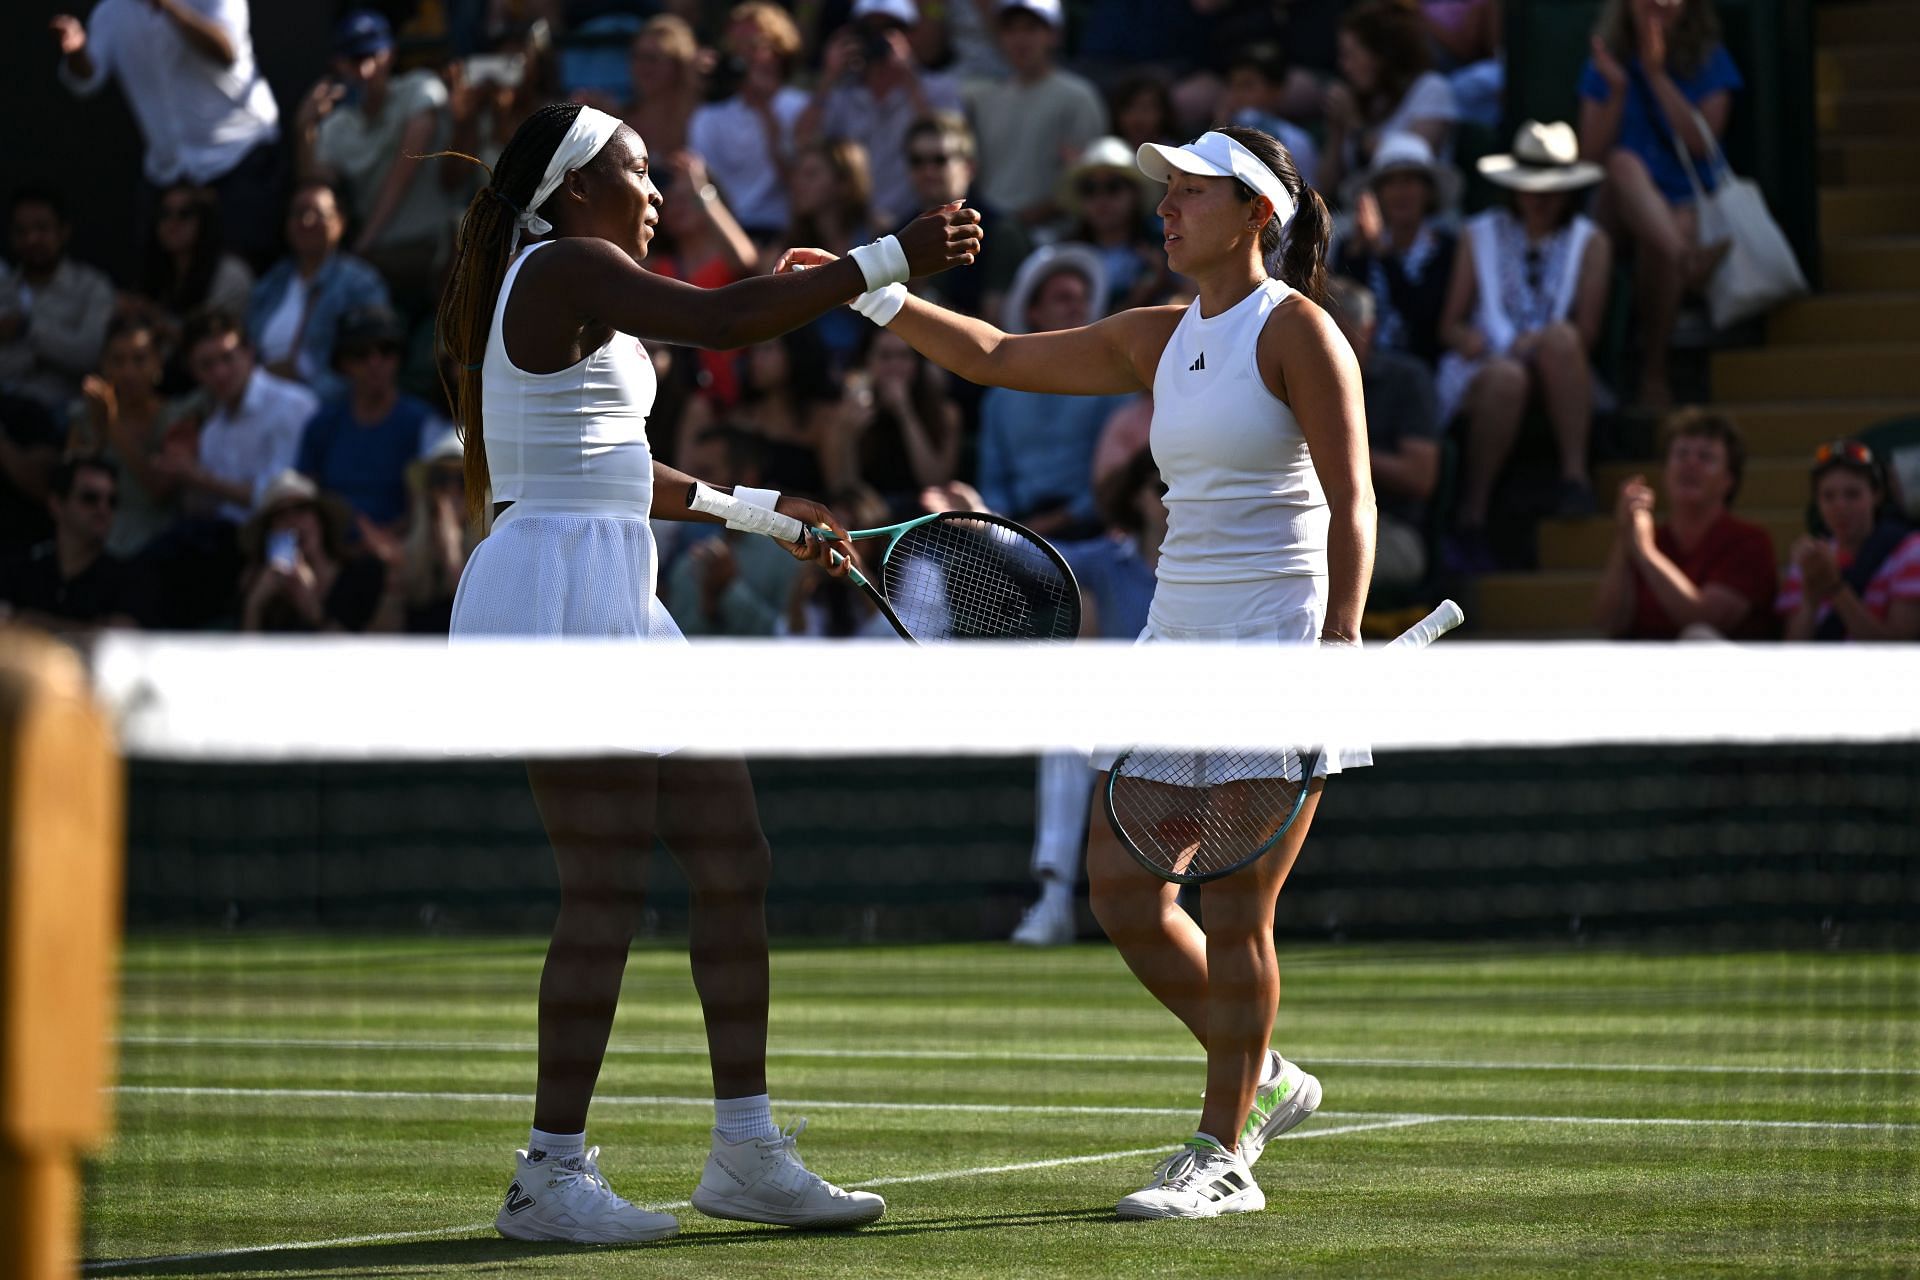 Coco Gauff and Jessica Pegula in action at Wimbledon